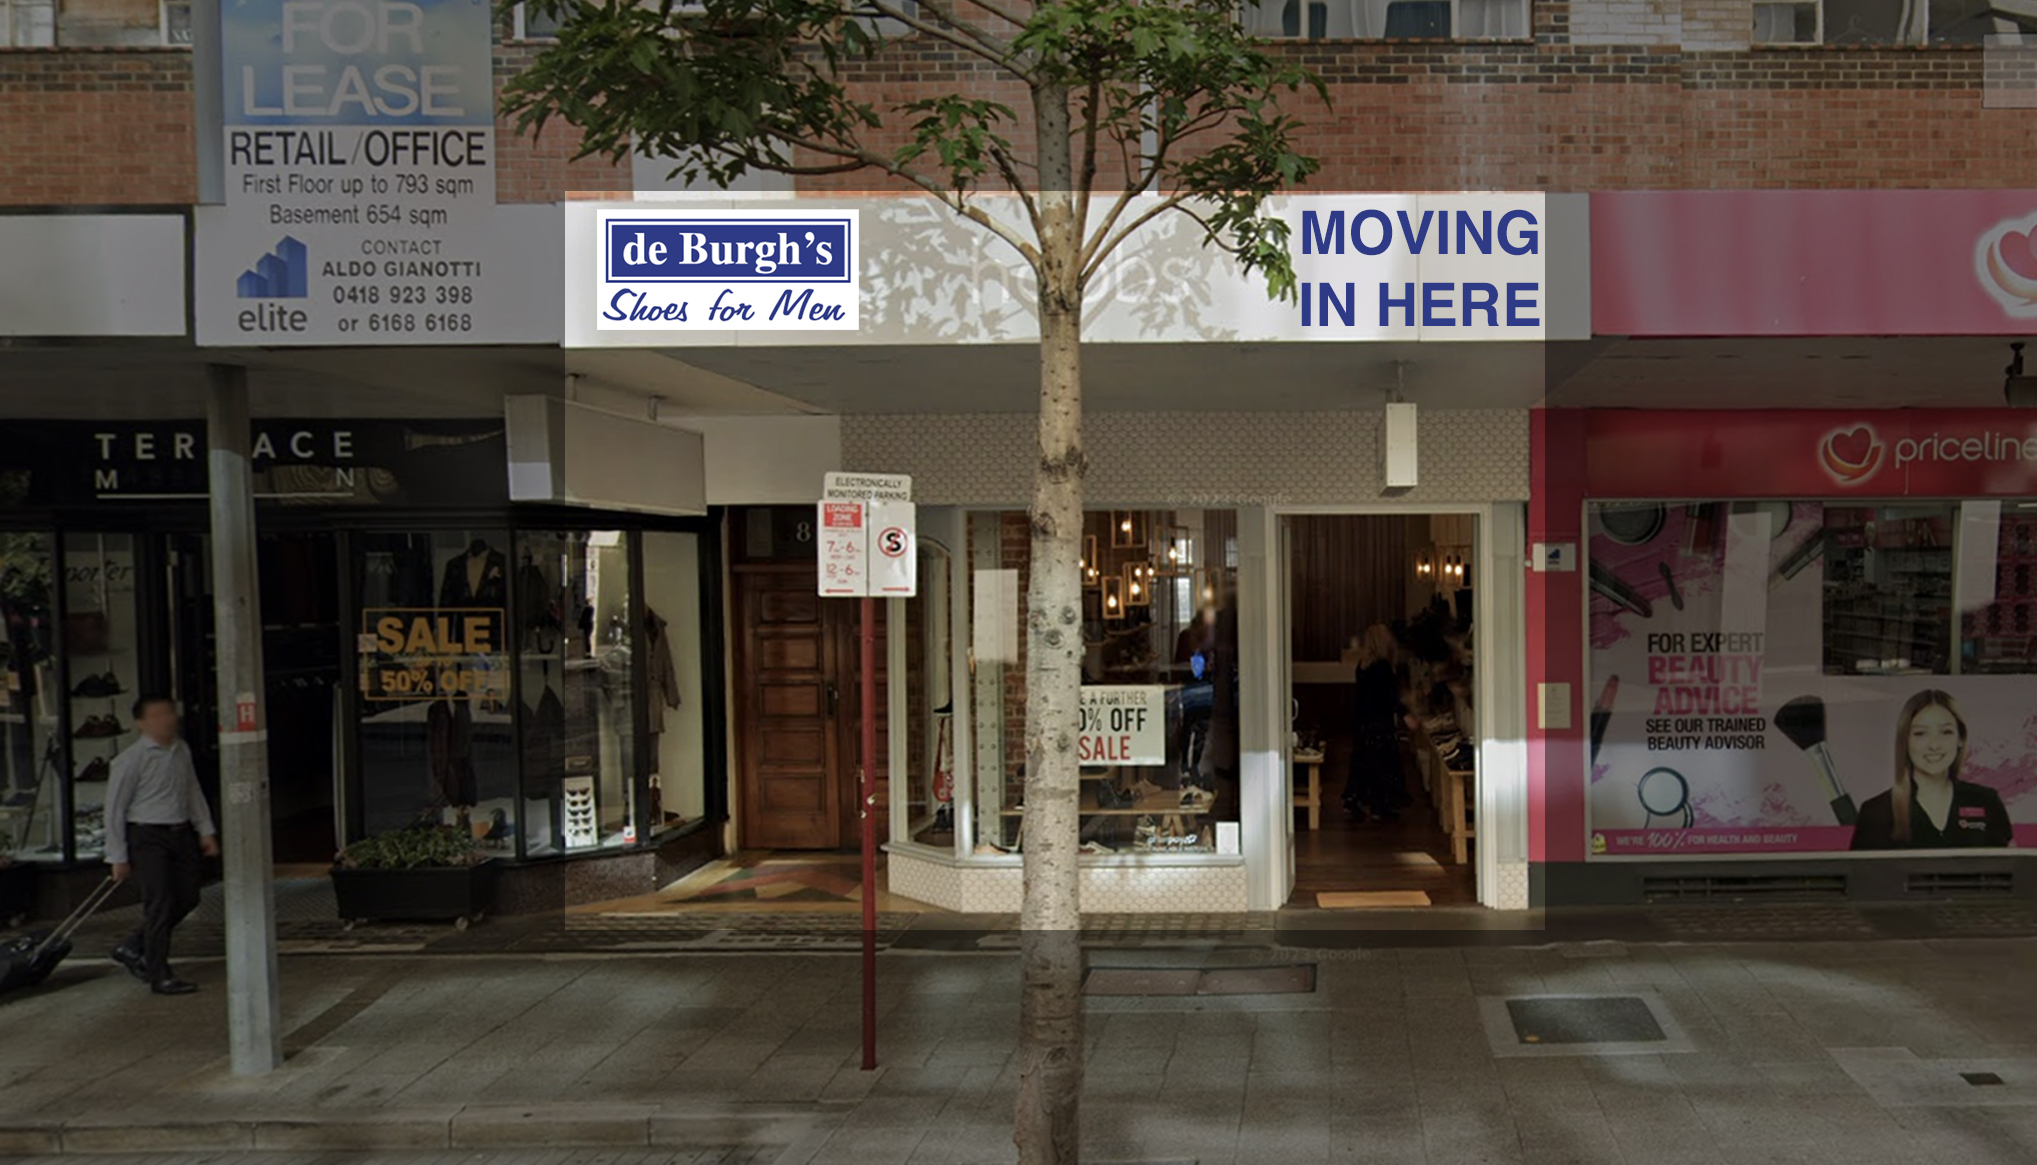 deburghs shoes for men move to Hay street